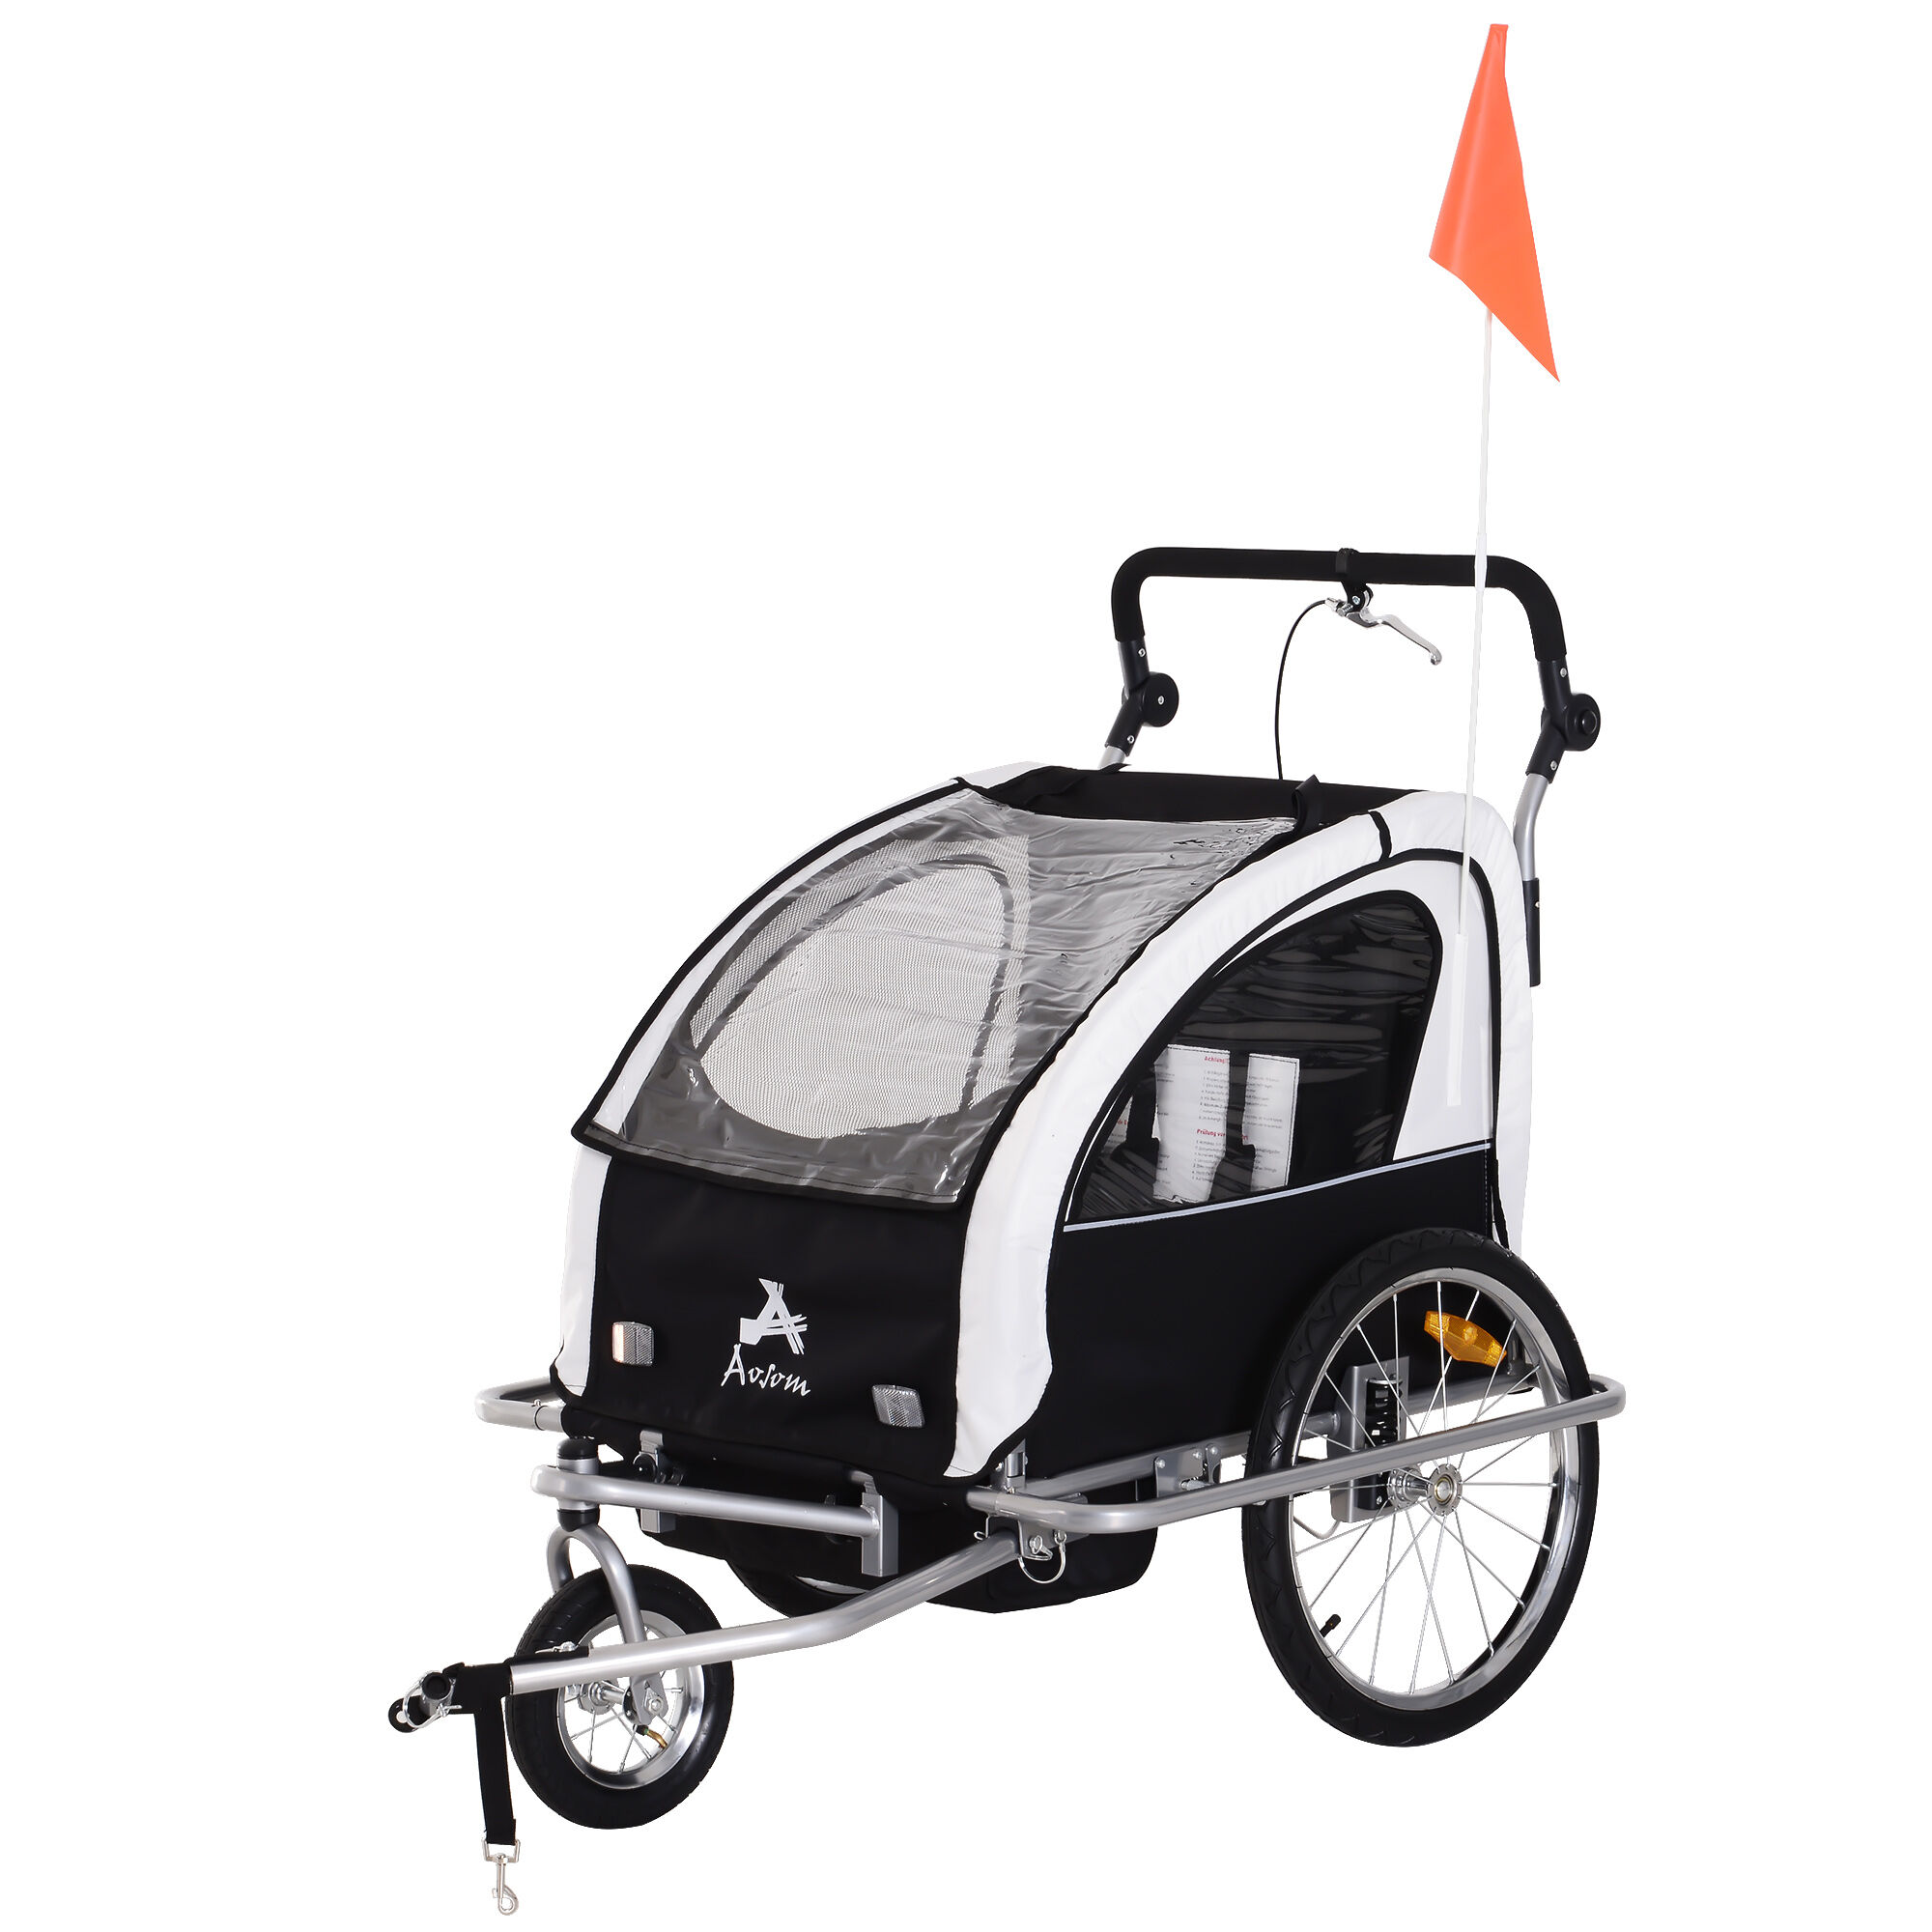 Aosom Elite 360 Swivel Single Child White Bike Trailer, Safe Bicycle Cargo Carrier with Safety Harnesses & Cart   Aosom.com